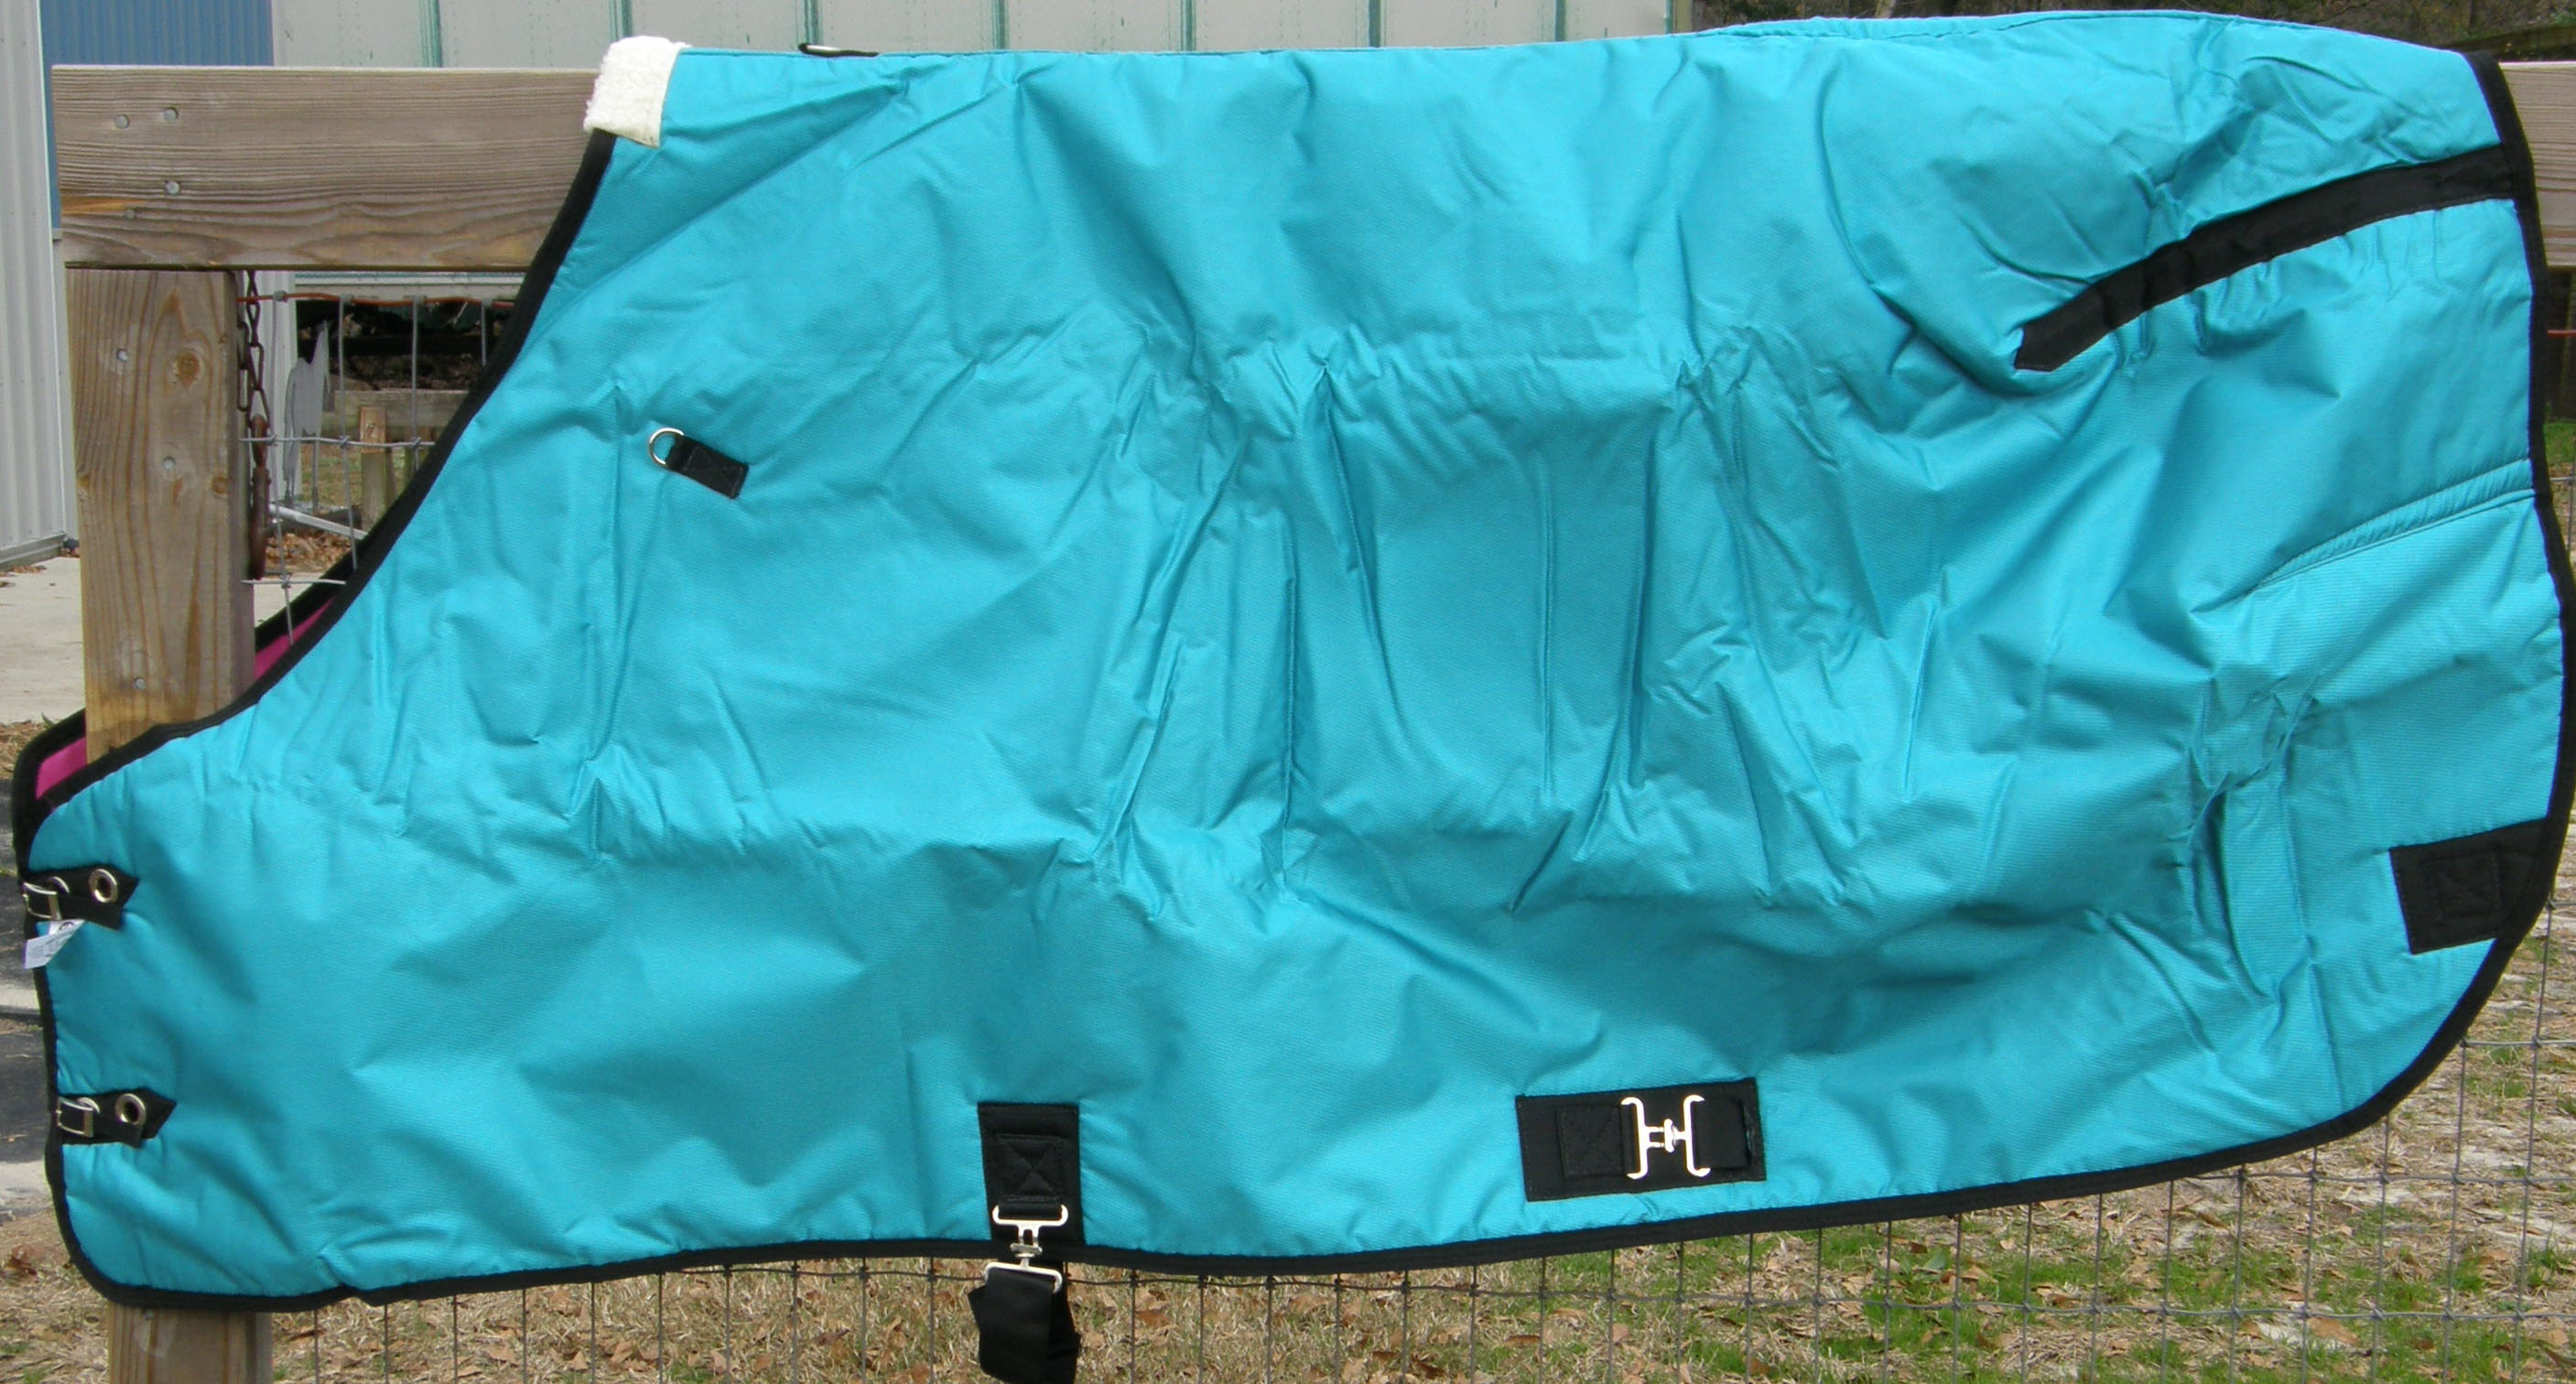 78” OF Custom Made Saddlery Non-Quilted Water Resistant Thermal Turnout Blanket Stable Blanket Horse Winter Blanket Teal